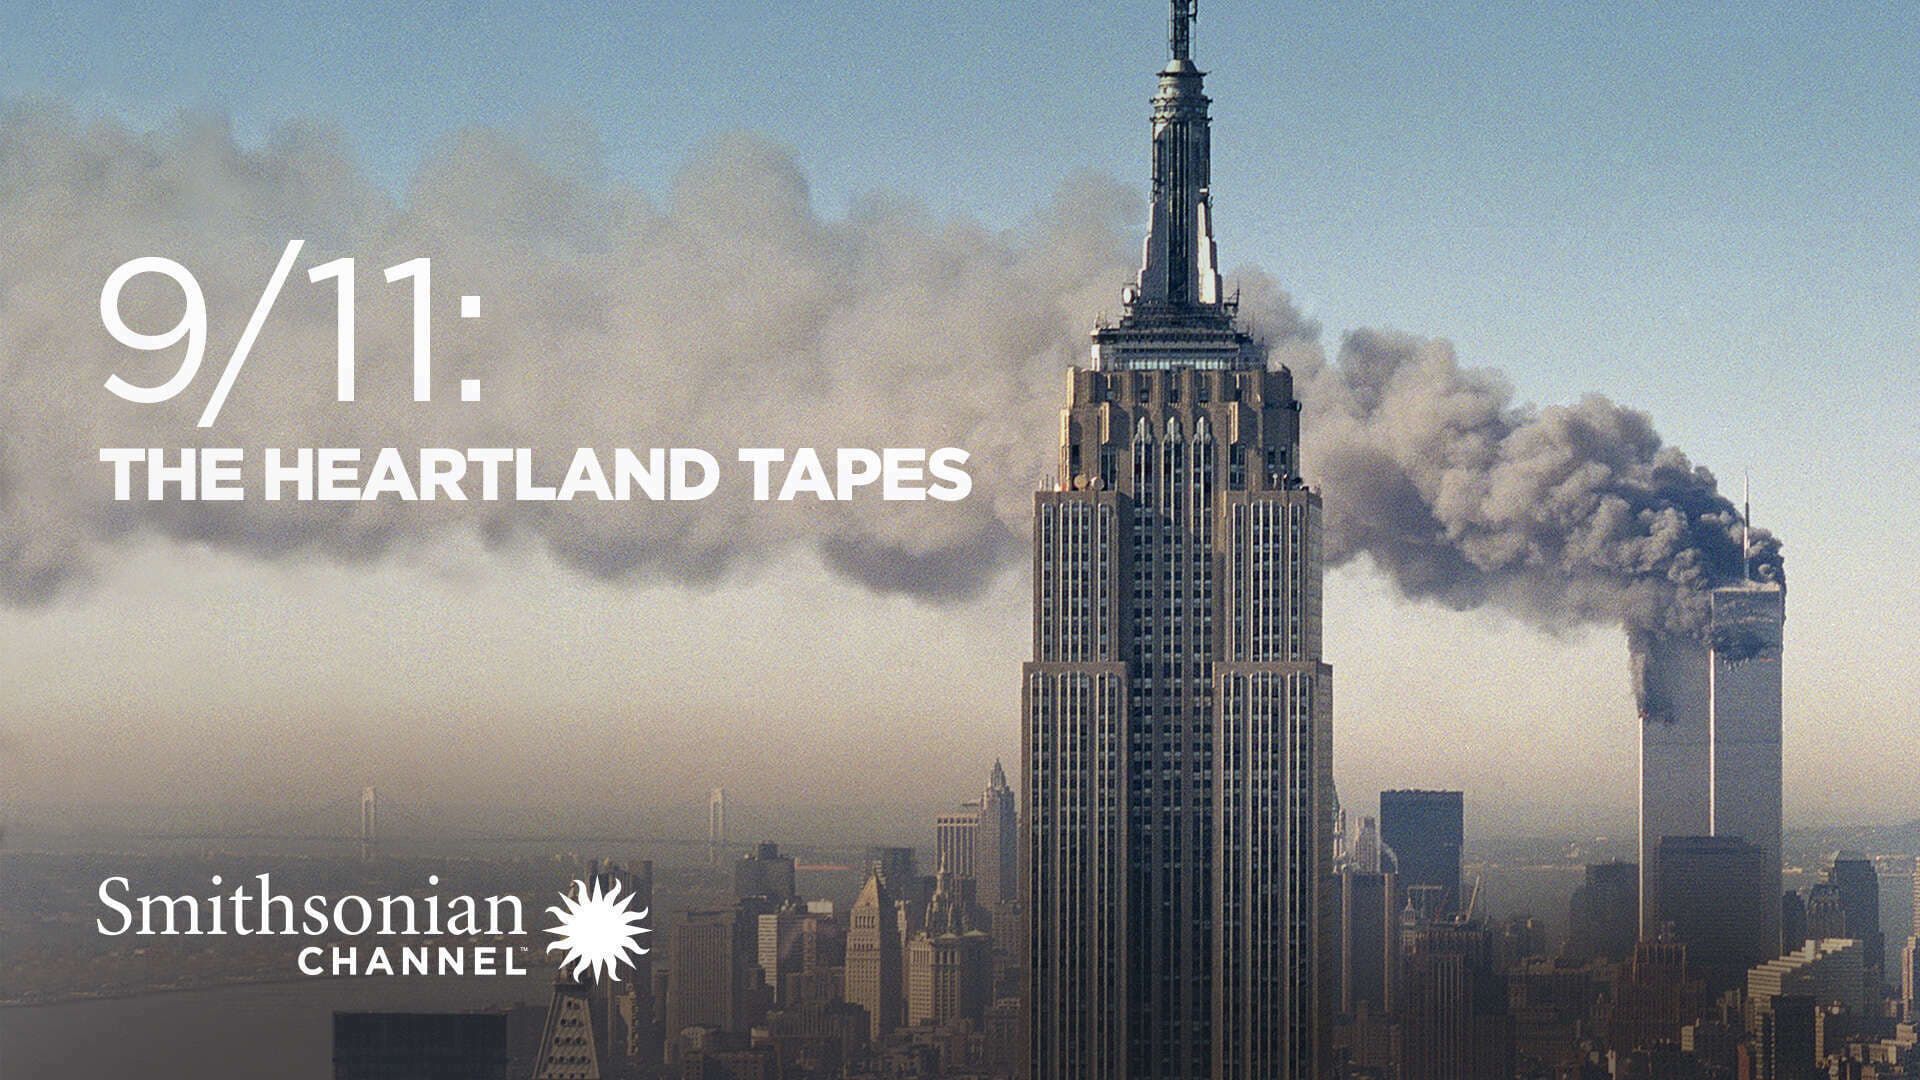 9/11: The Heartland Tapes background